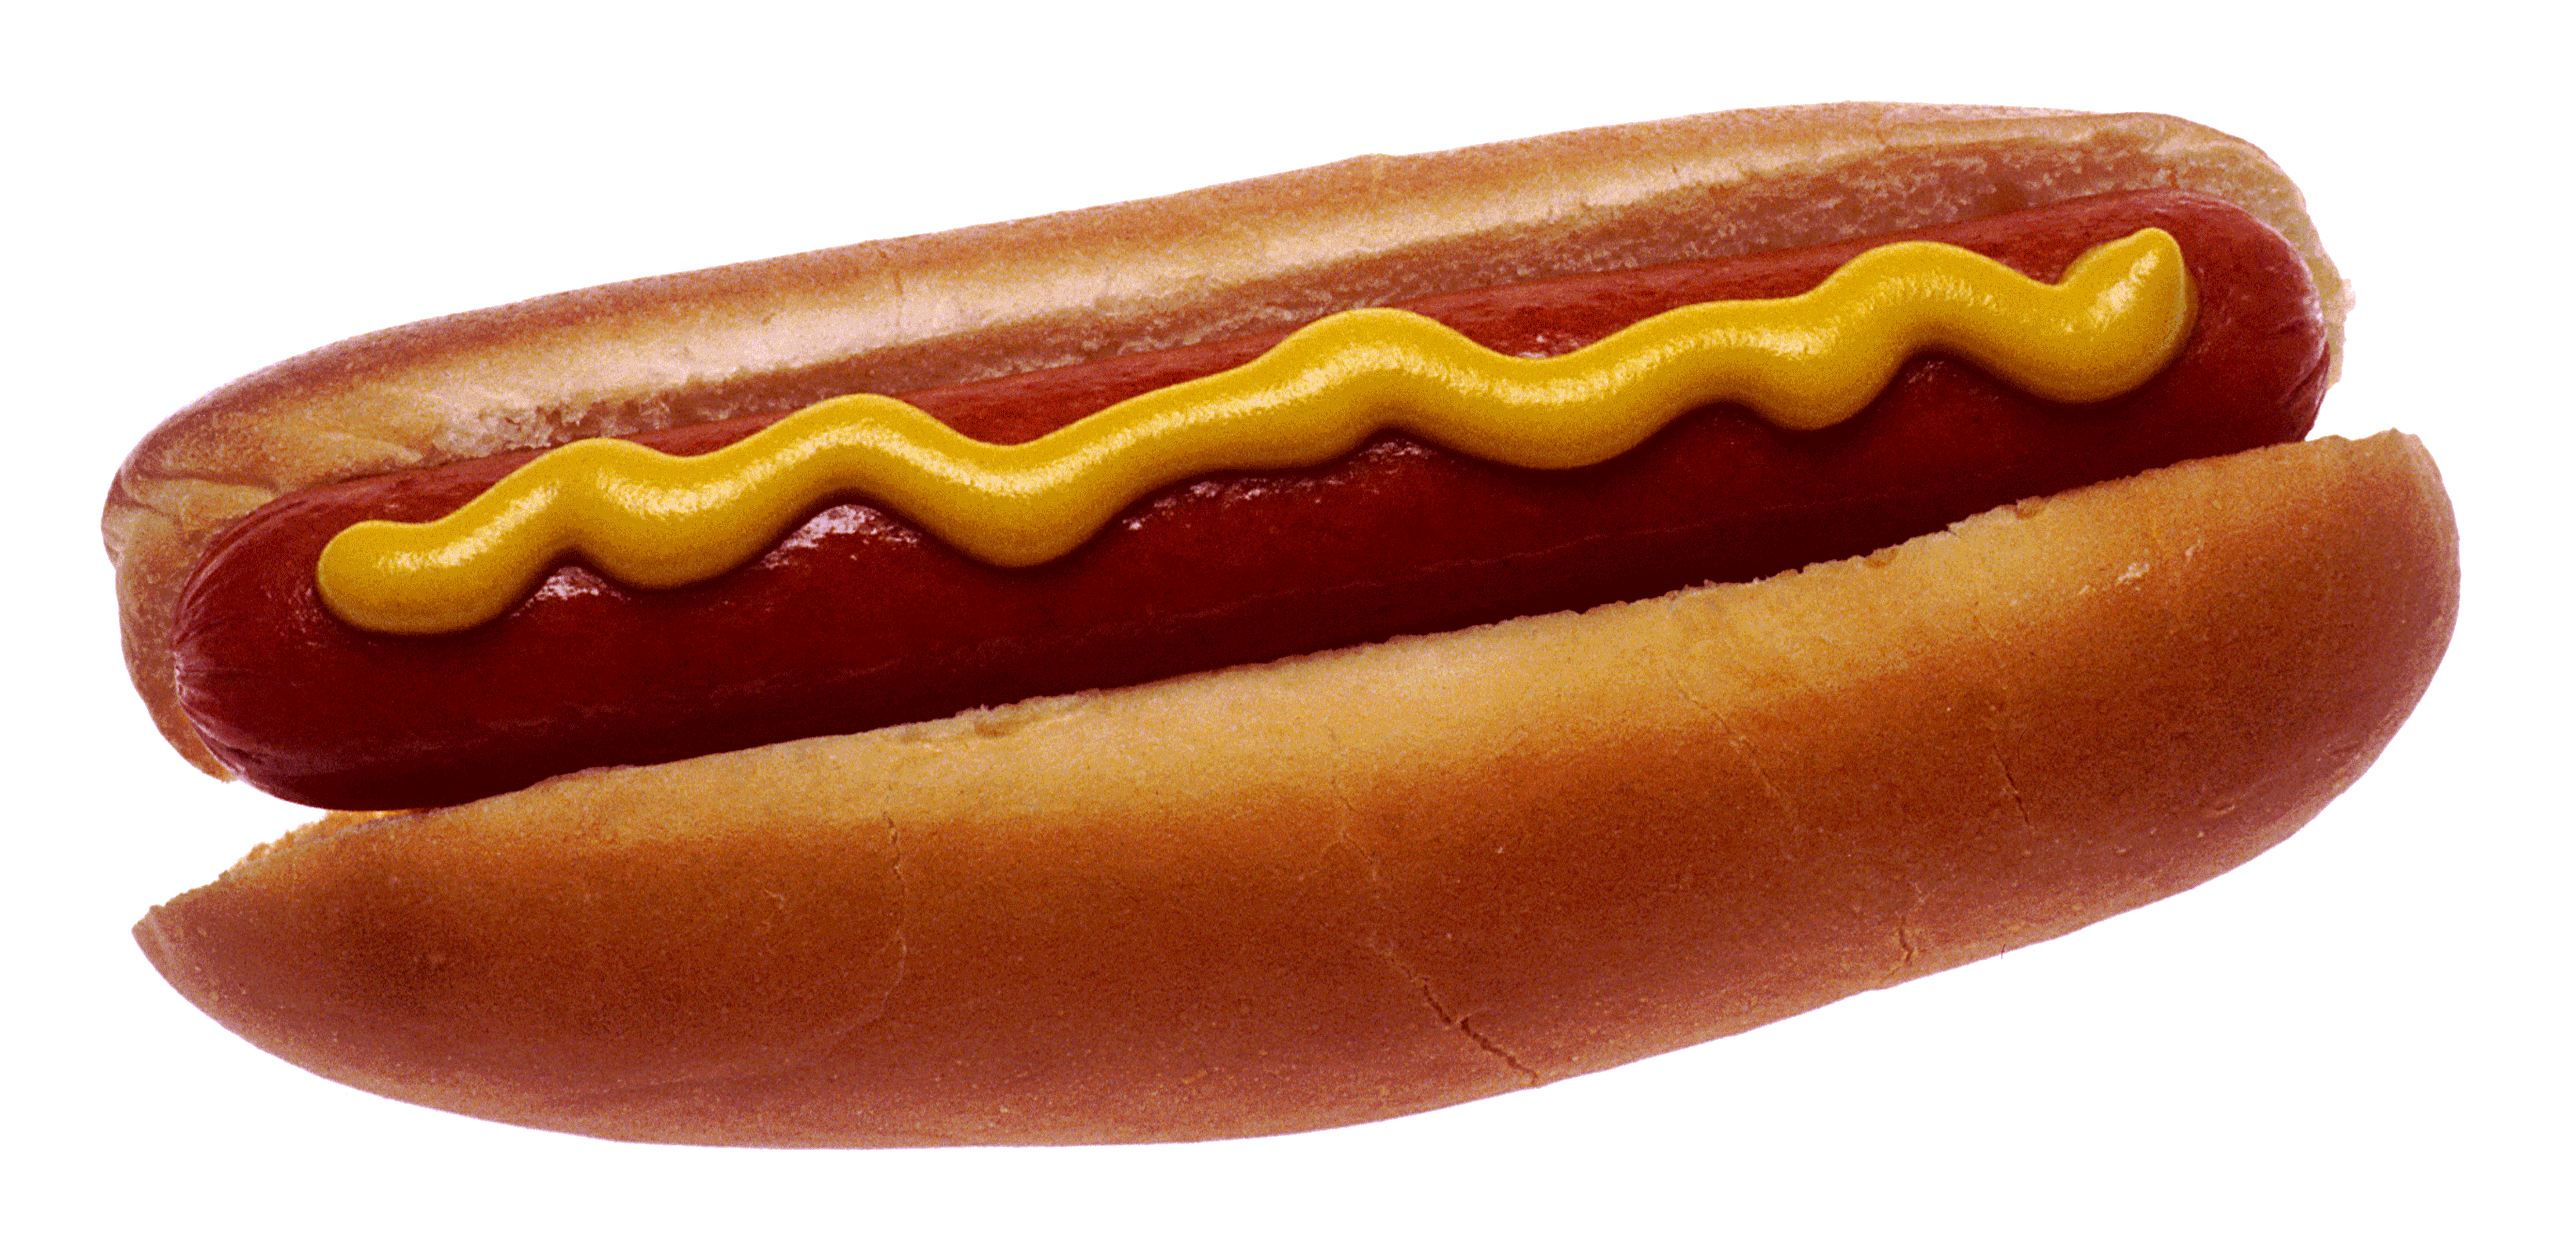 Which is healthier hot dog or sausage?